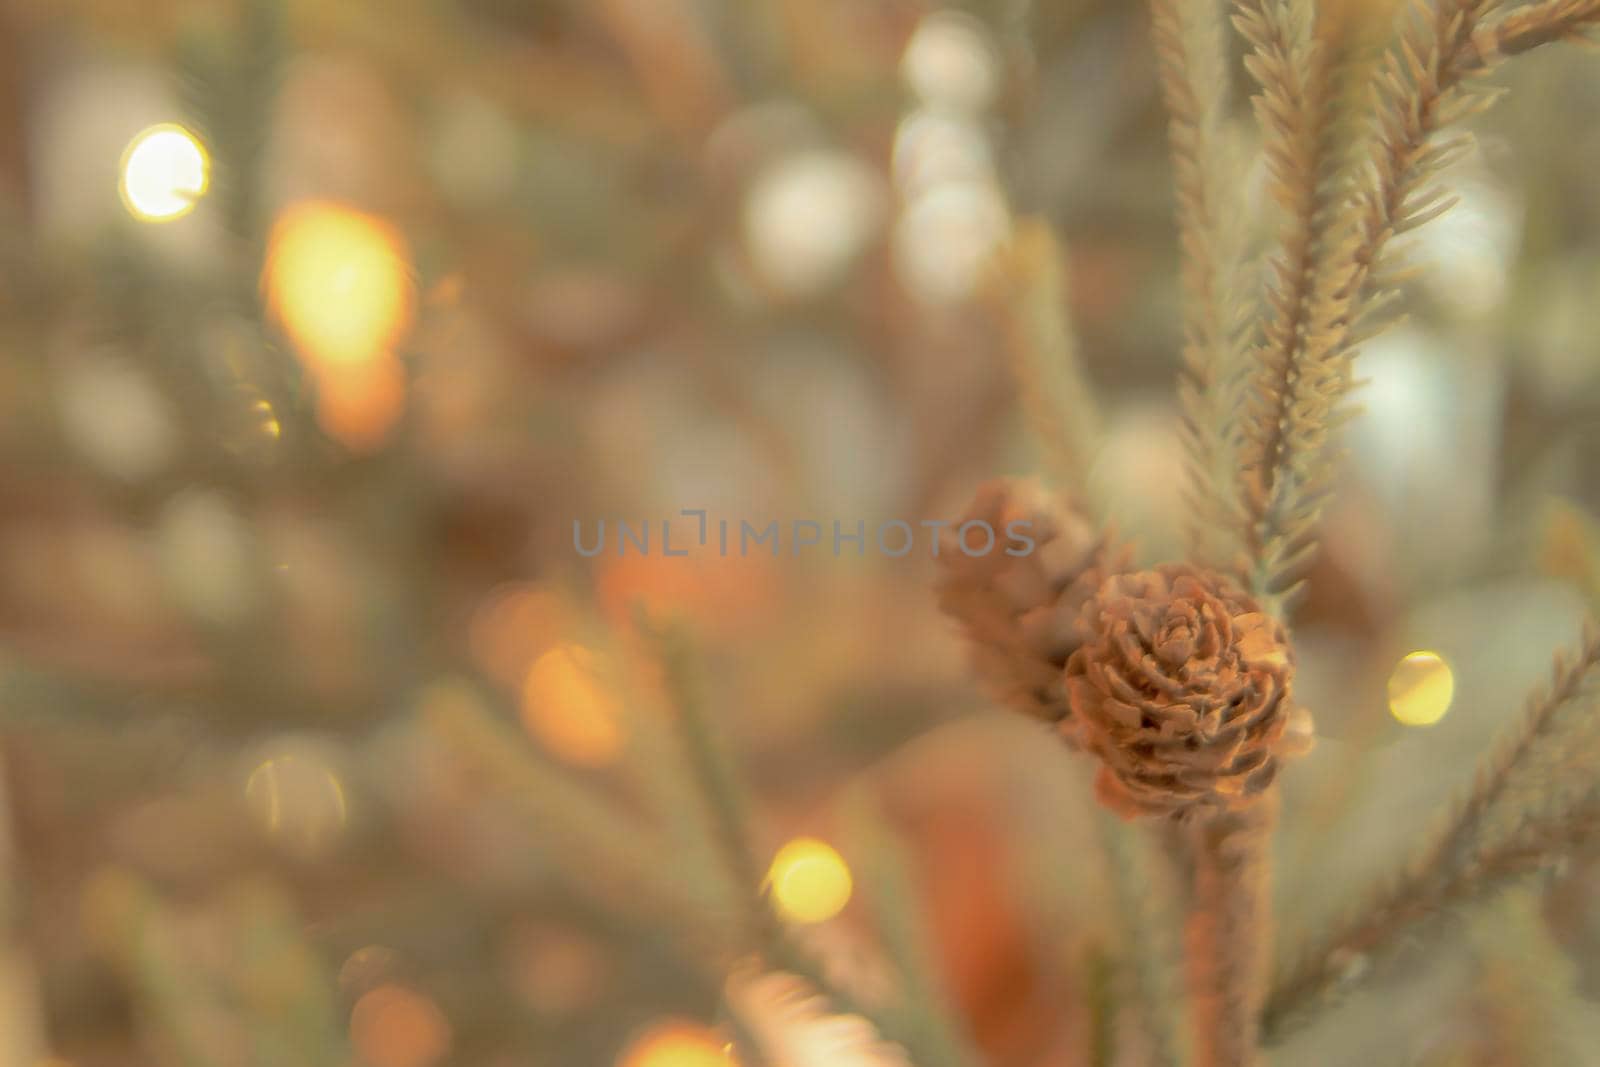 Gold Christmas background of de-focused lights with decorated tree. Decorated Christmas tree on blurred background. Happiness moment . New year background by Petrichor